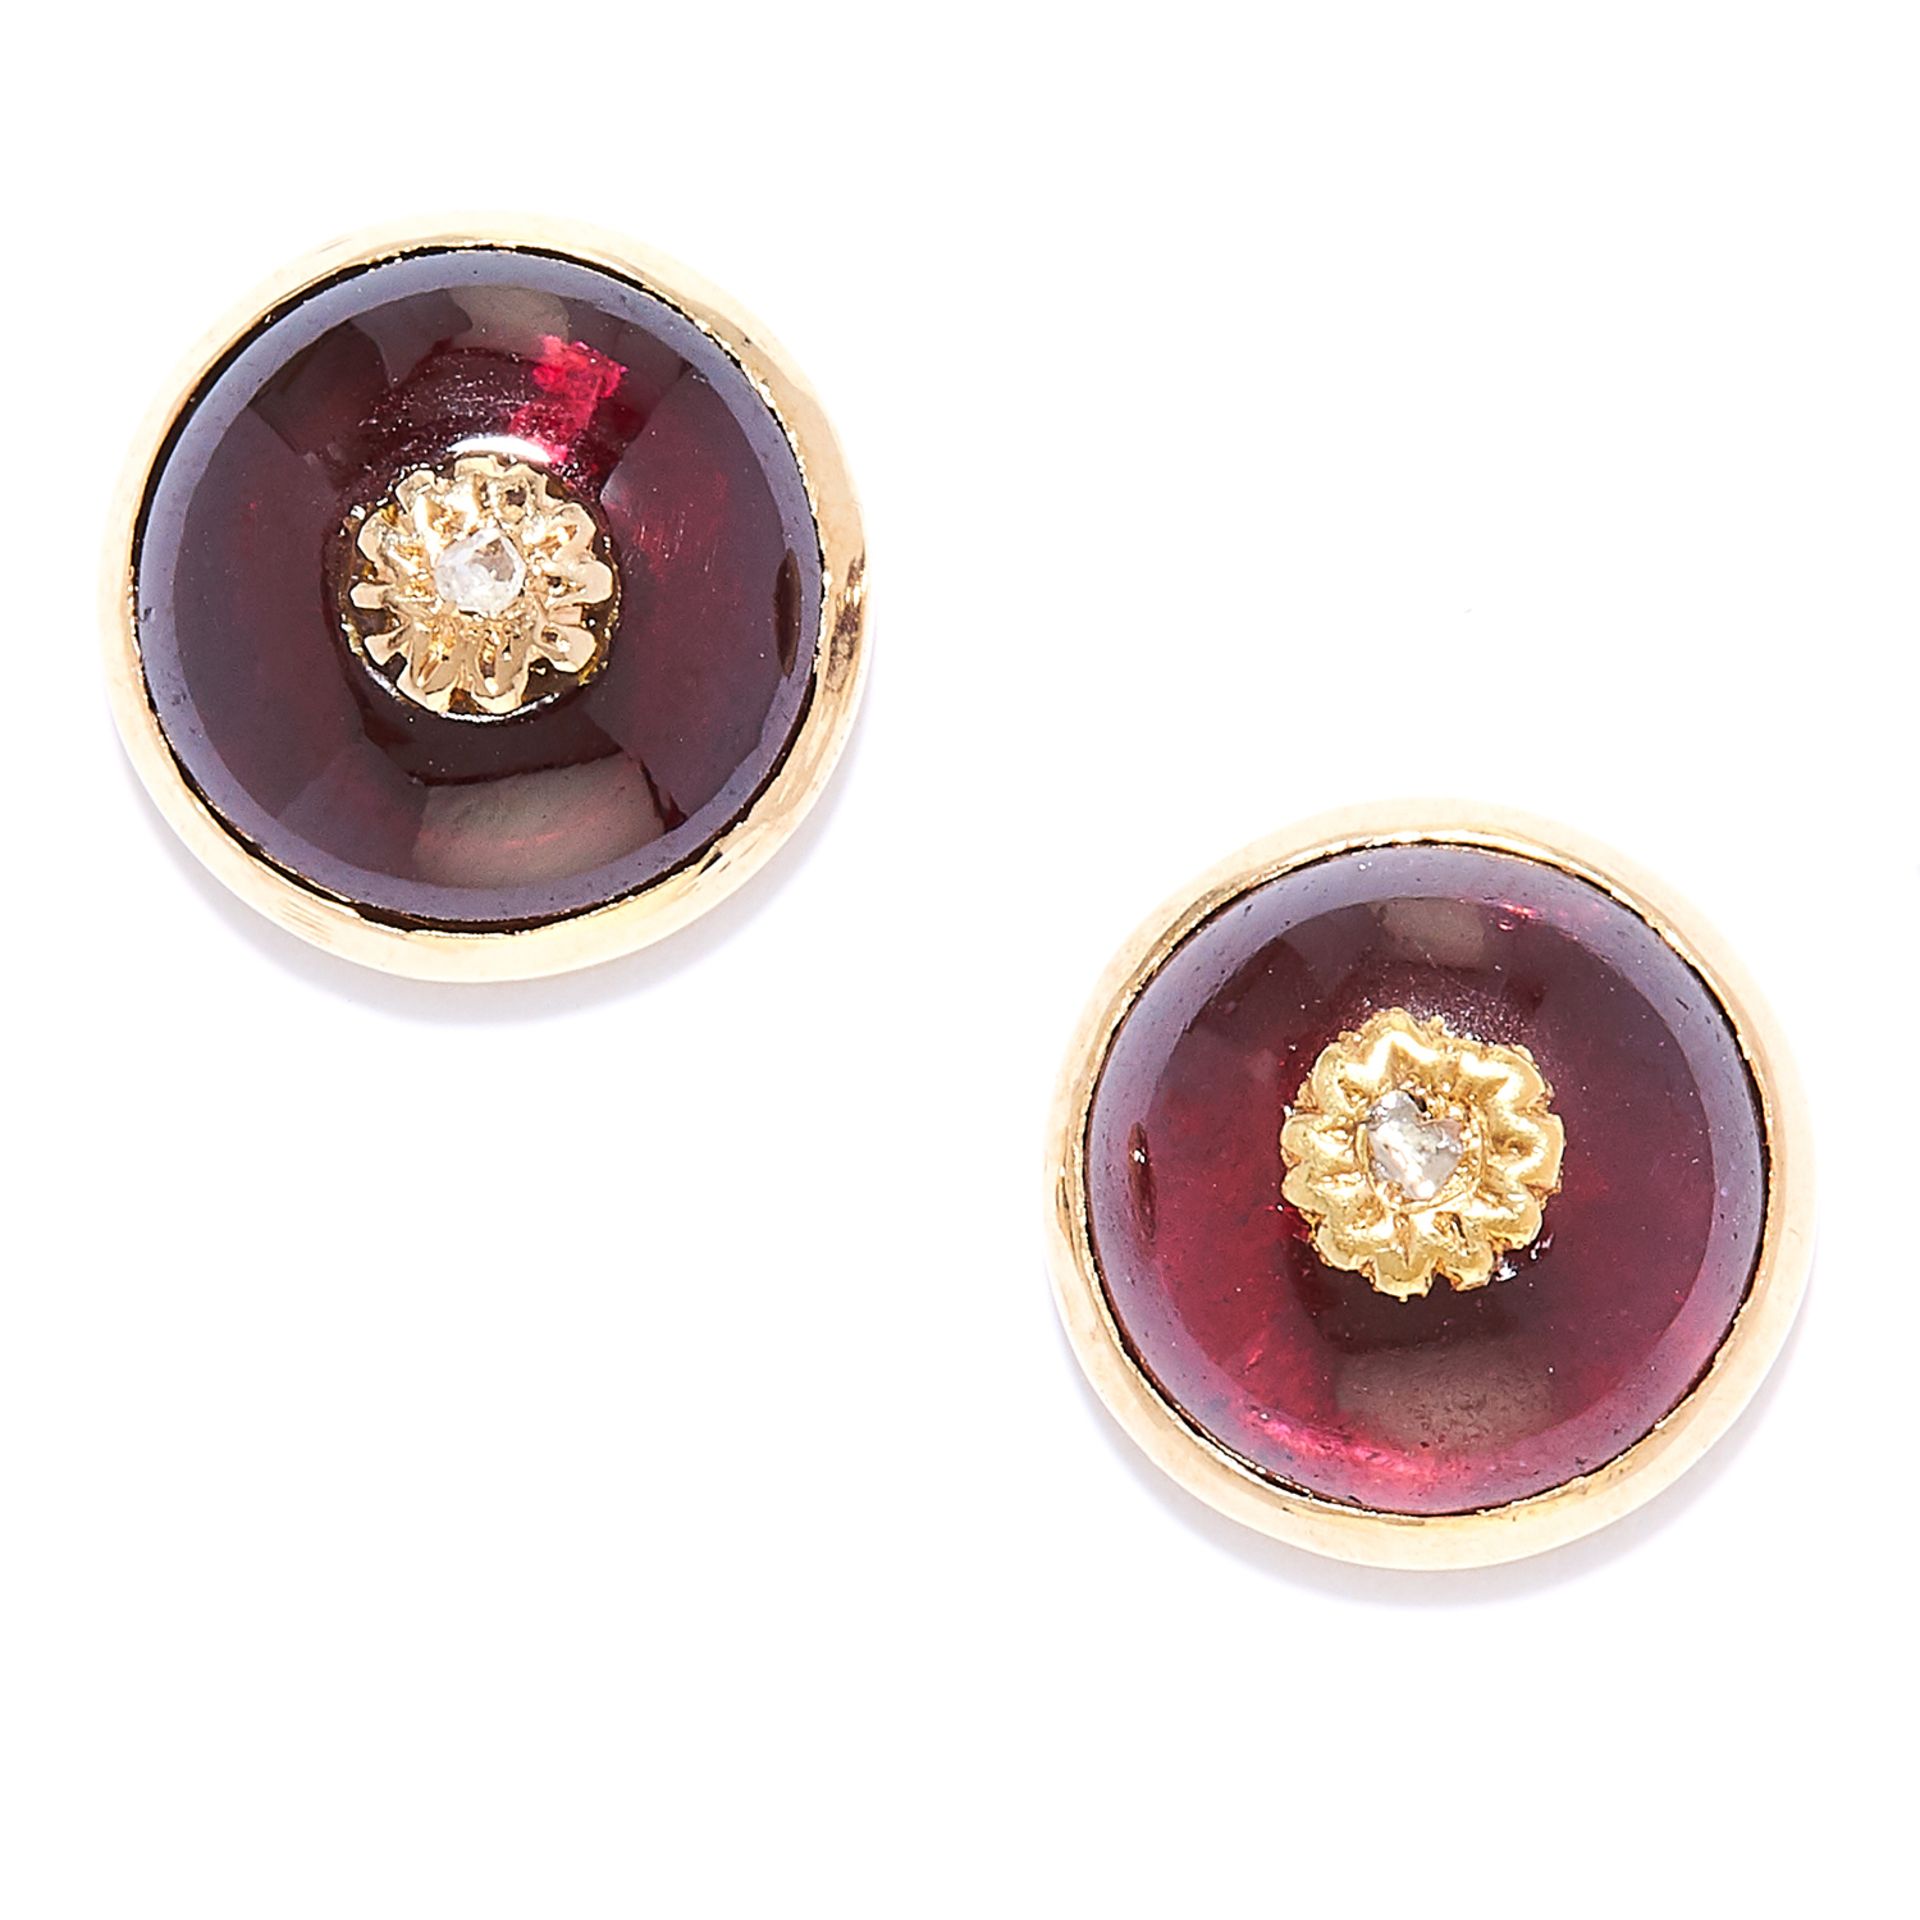 ANTIQUE GARNET AND DIAMOND EARRINGS in high carat yellow gold, each set with a cabochon garnet and